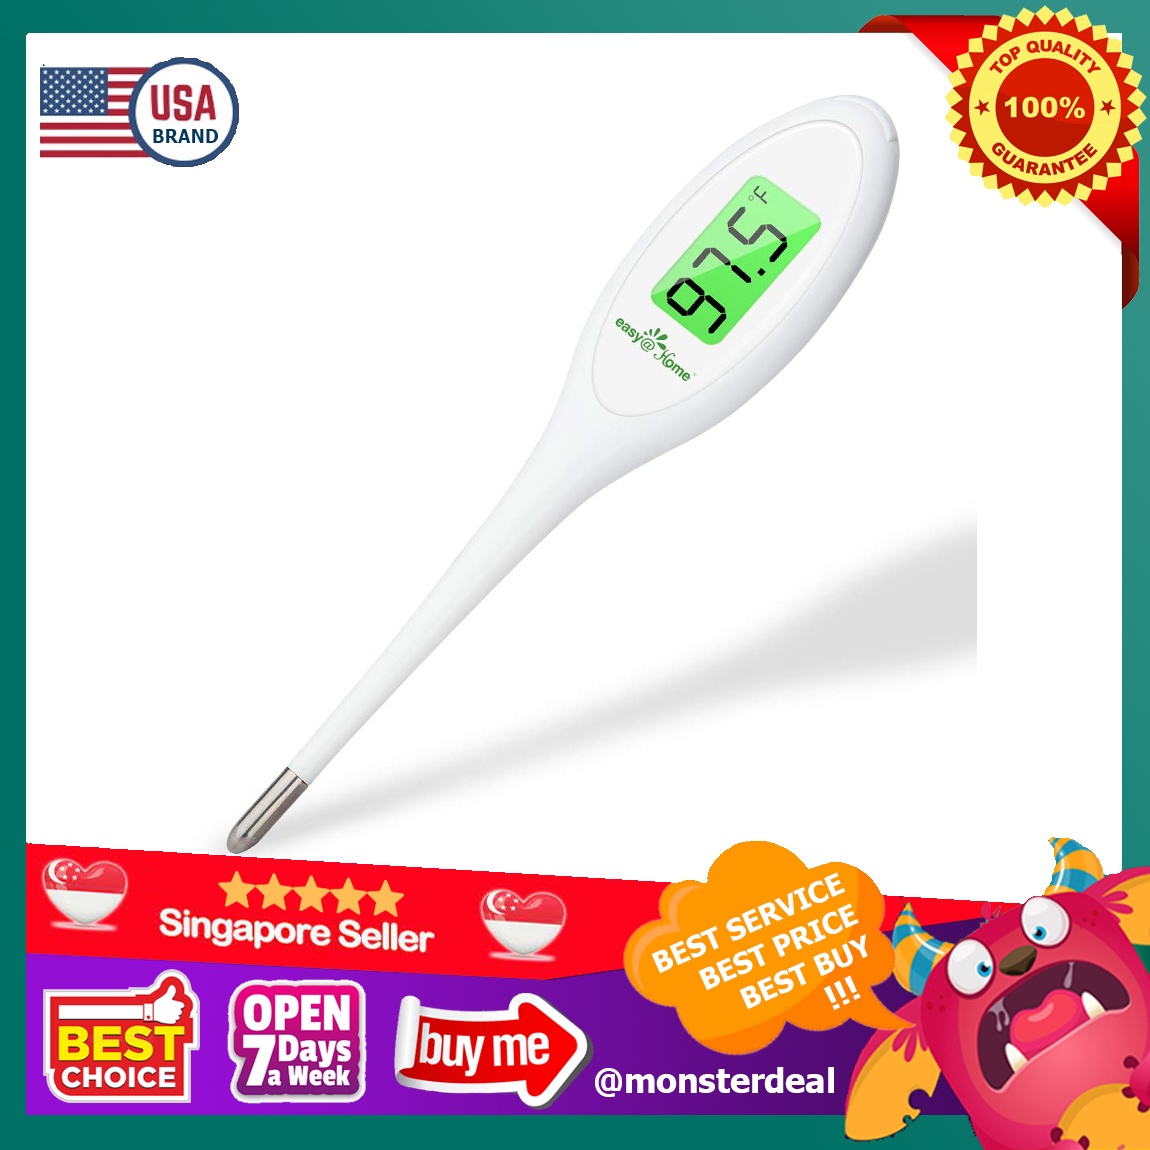 8 Sec Fast Reading Easy@Home Digital Oral Thermometer for Adult